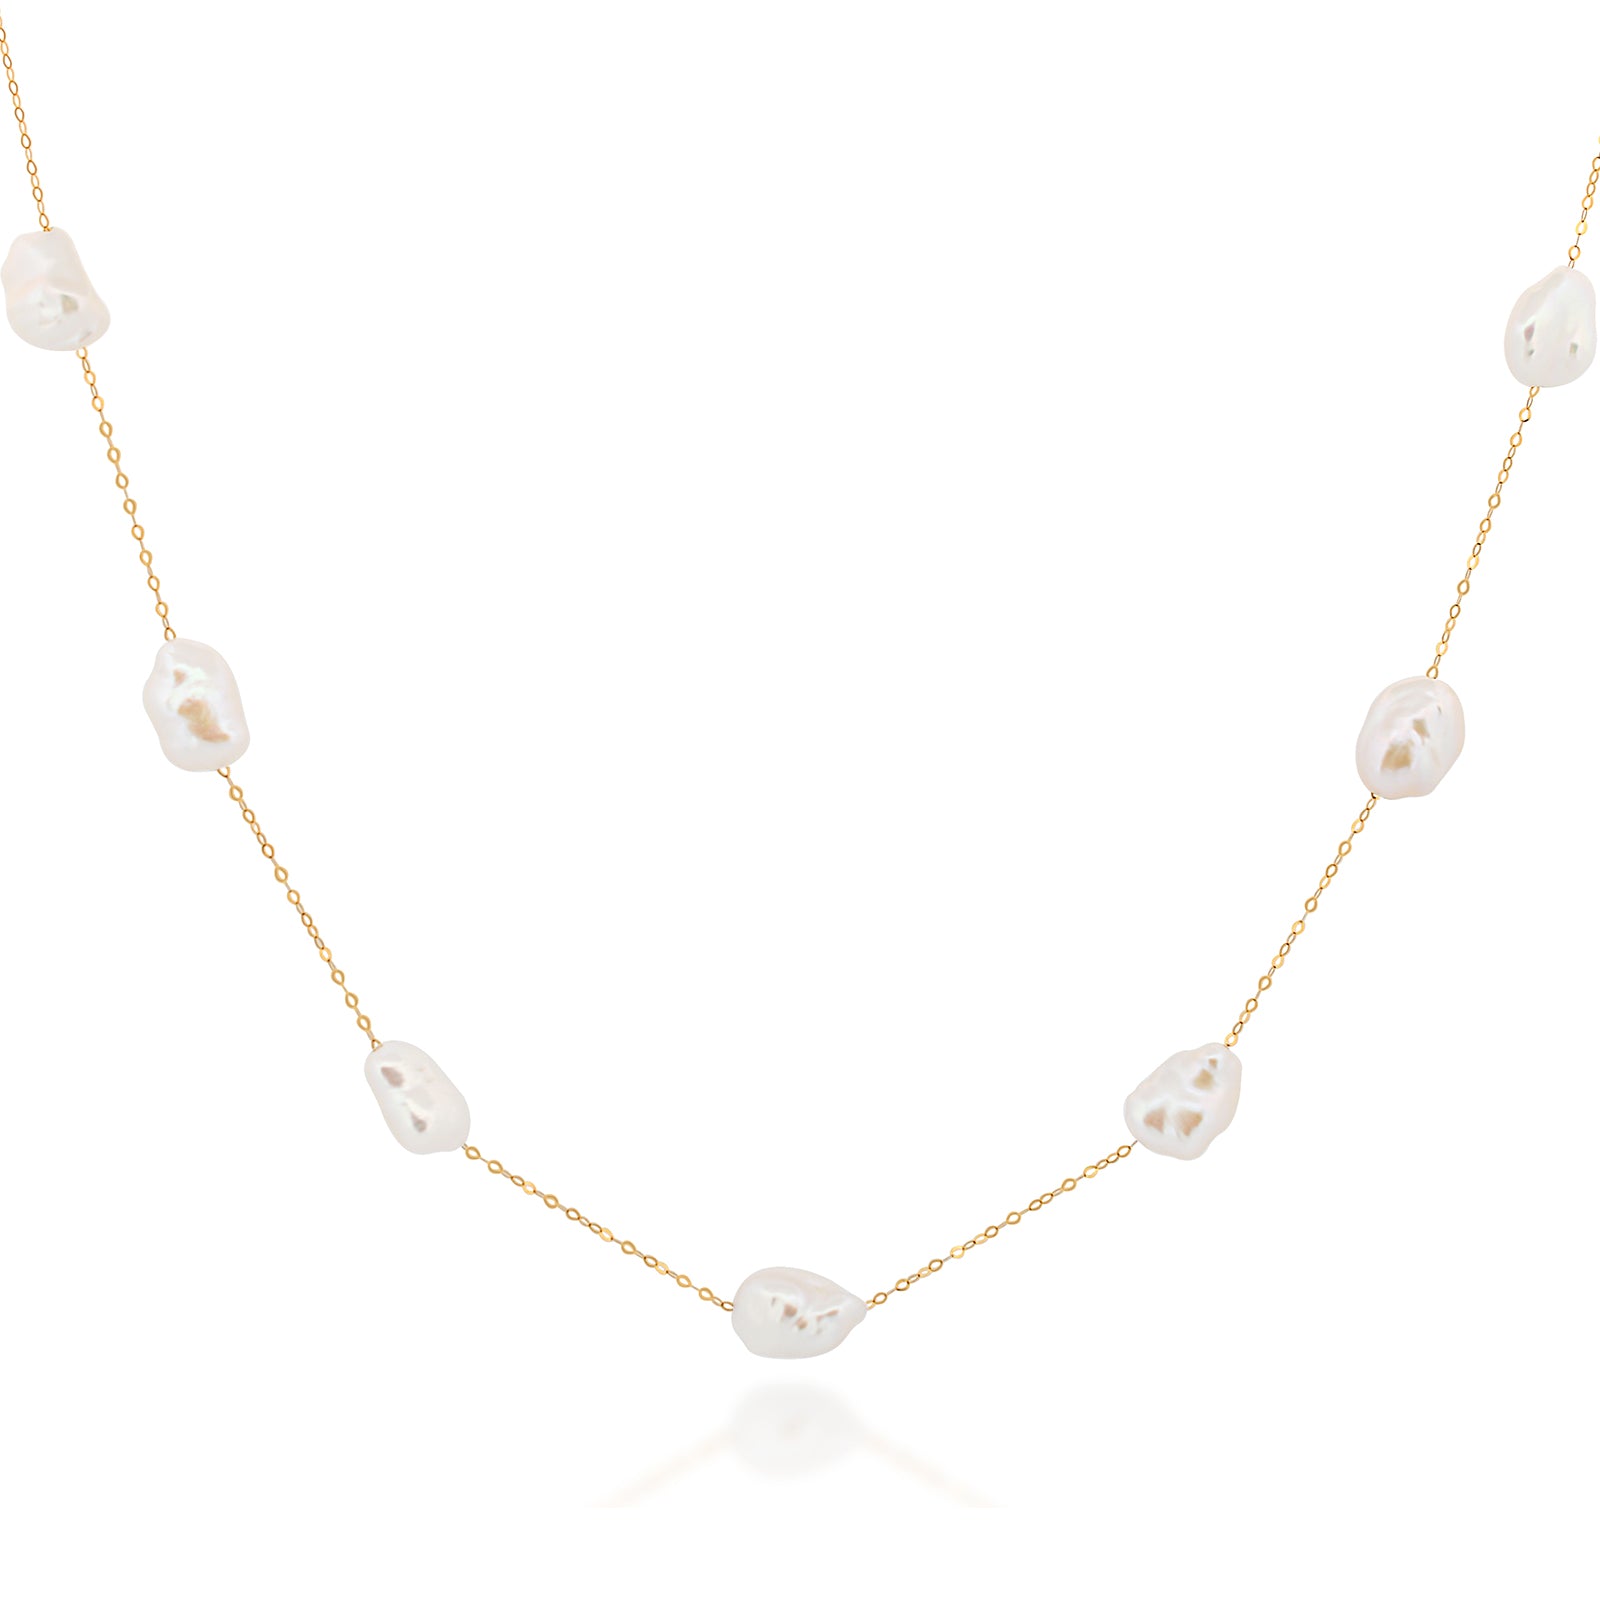 Floating Keshi Pearl Necklace in 18ct Yellow Gold